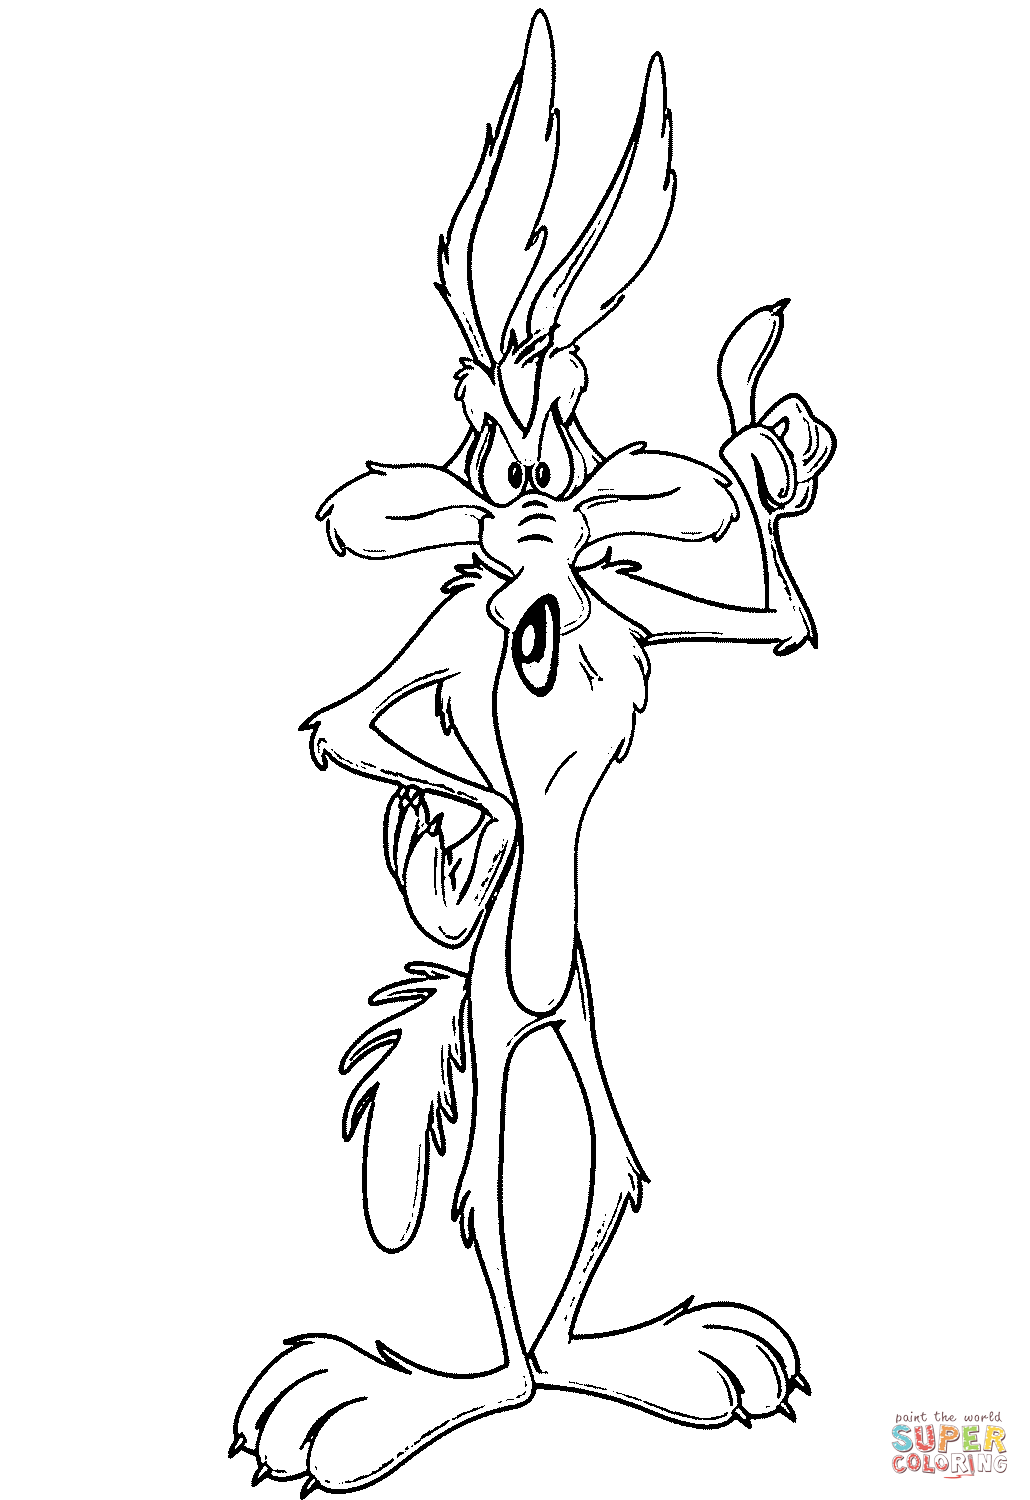 Wile E. Coyote coloring page Free Printable Coloring Pages.